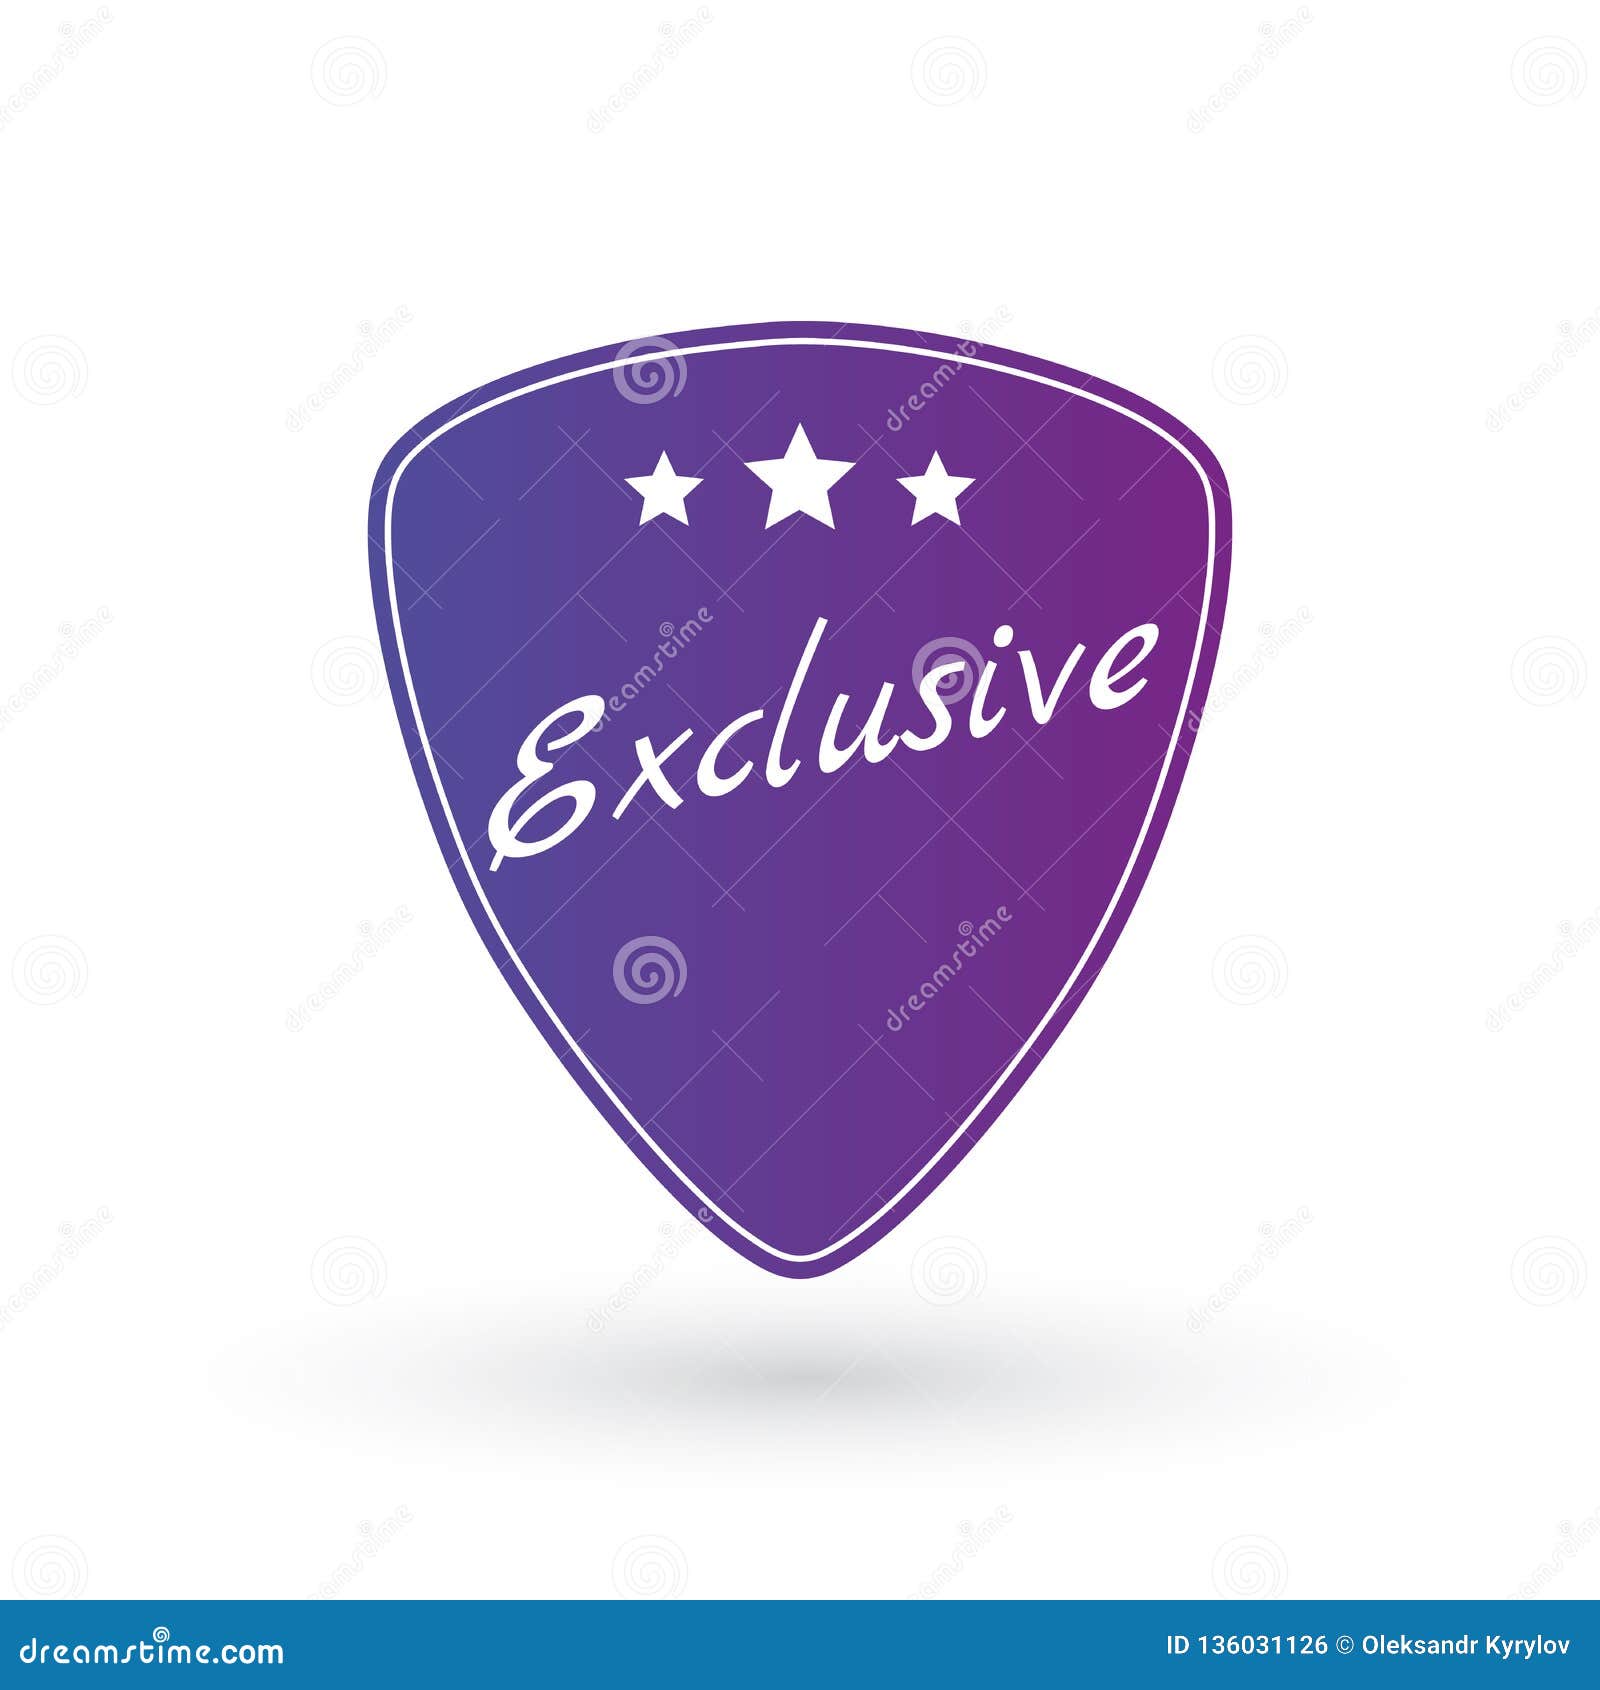 Identity Badge Label Emblem Logo Or Badge Template Exclusive Word And Stars Vector Illustration Isolated On White Background Stock Illustration Illustration Of Stars Business 136031126